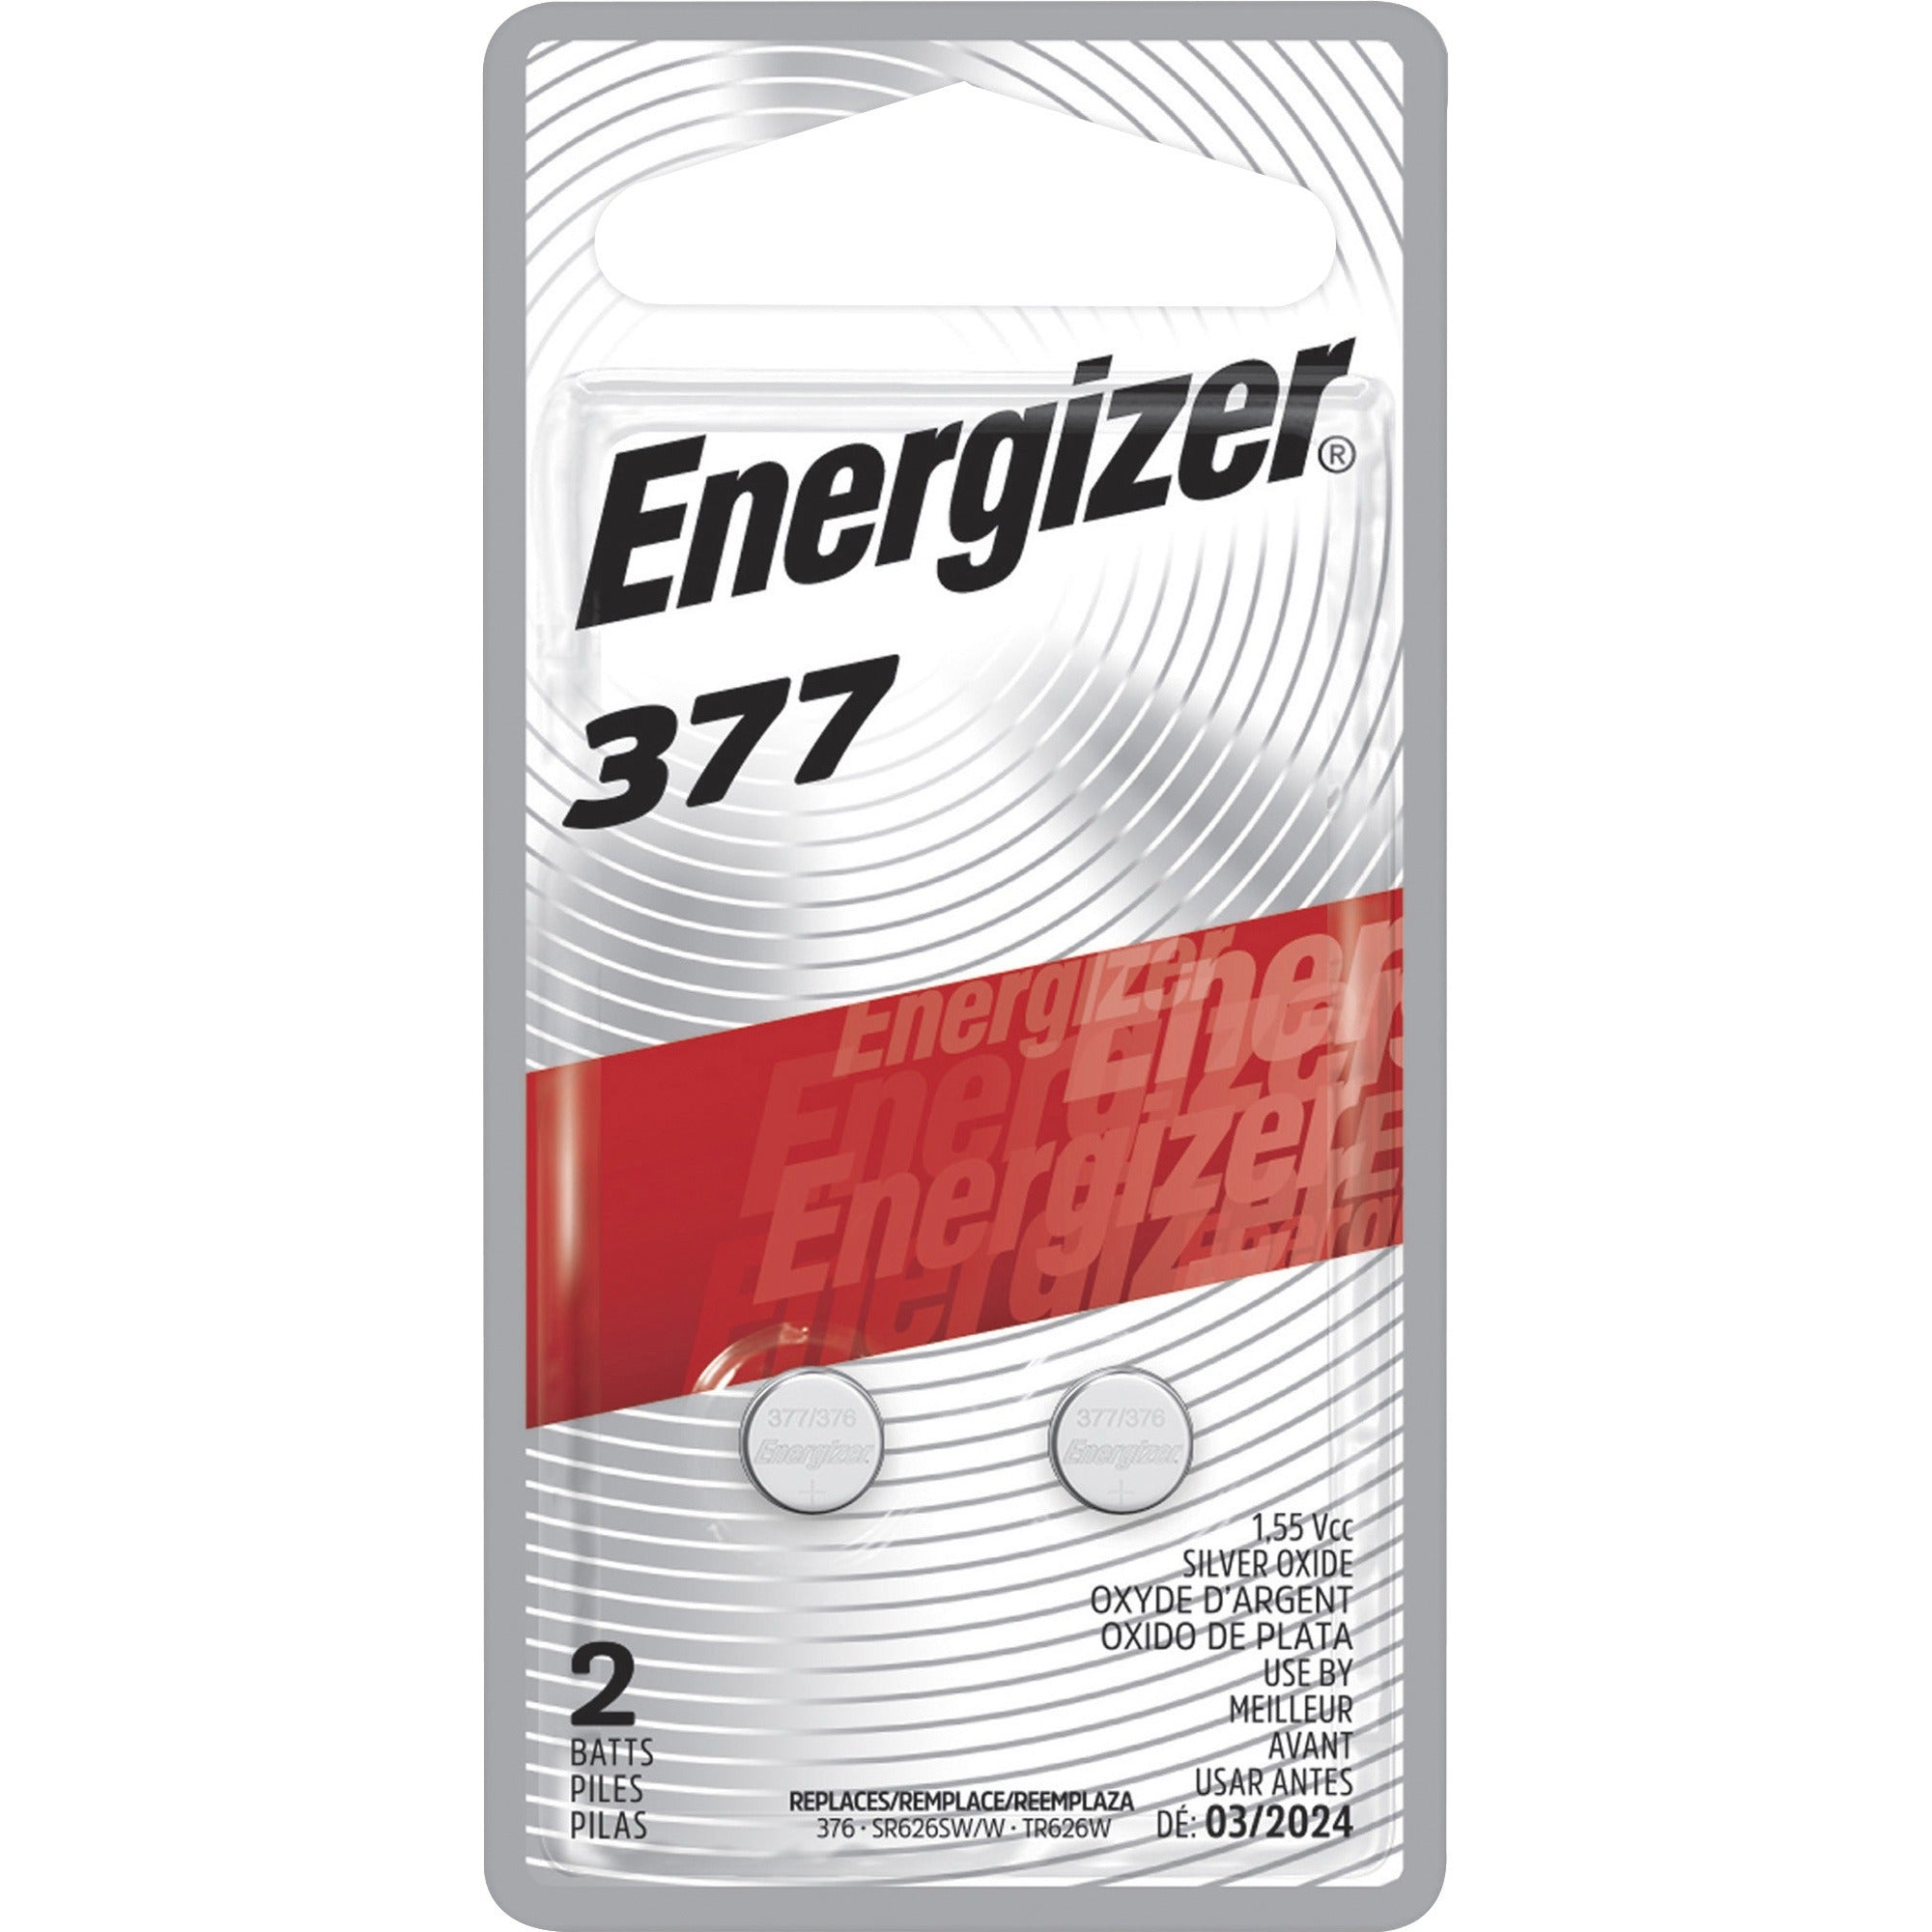 energizer-alkaline-a23-battery-2-packs-for-multipurpose-glucose-monitor-toy-calculator-377-24-mah-155-v-dc-72-carton_eve377bpz2ct - 1